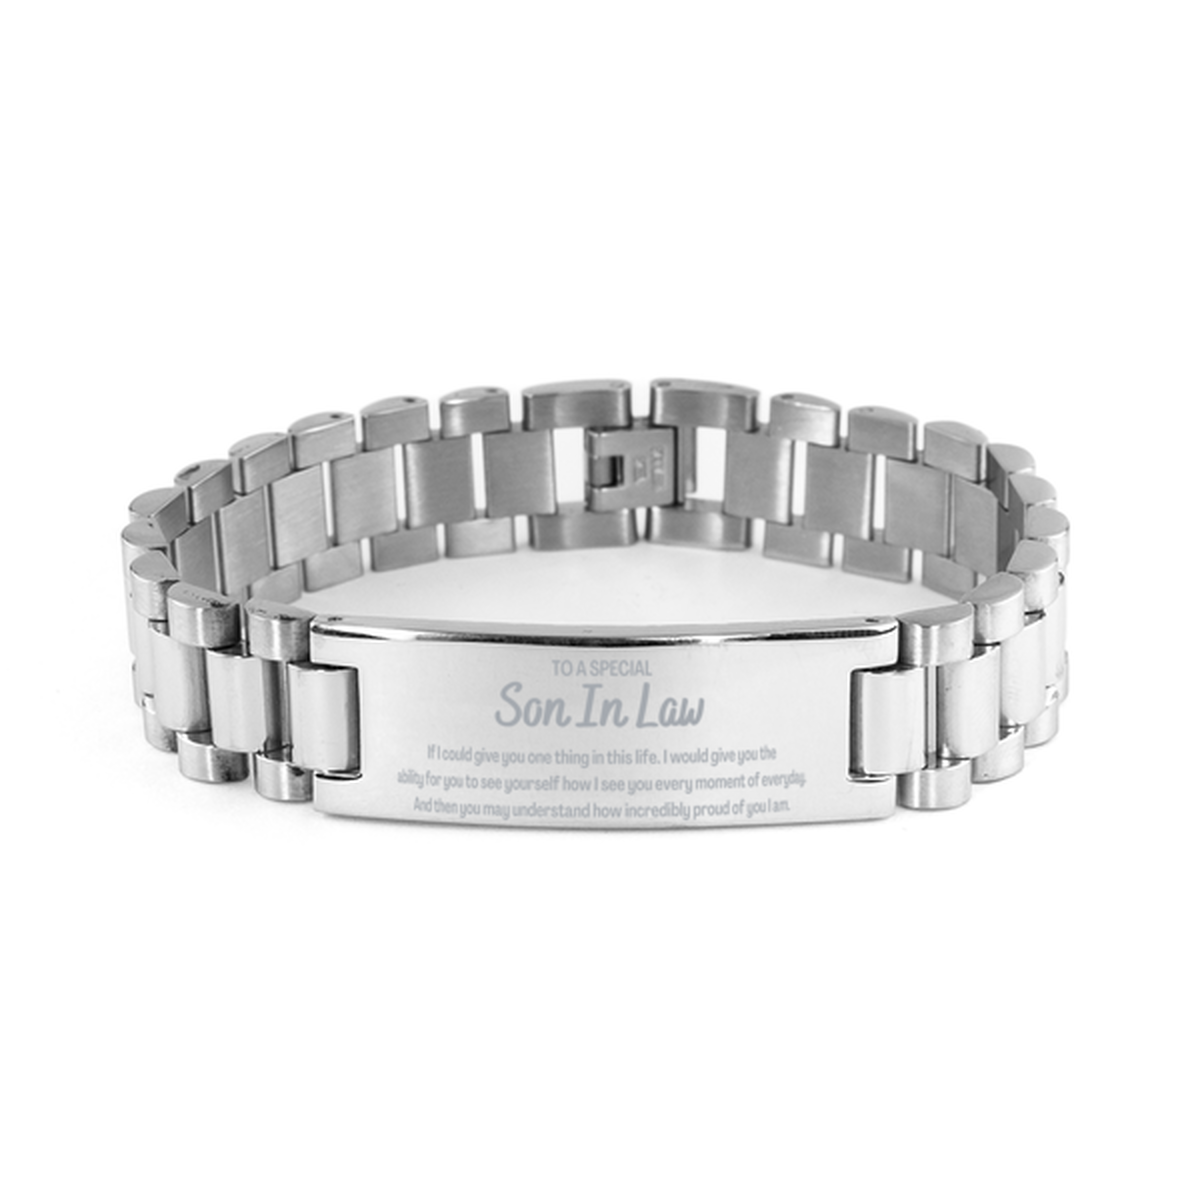 To My Son In Law Ladder Stainless Steel Bracelet, Gifts For Son In Law Engraved, Inspirational Gifts for Christmas Birthday, Epic Gifts for Son In Law To A Special Son In Law how incredibly proud of you I am